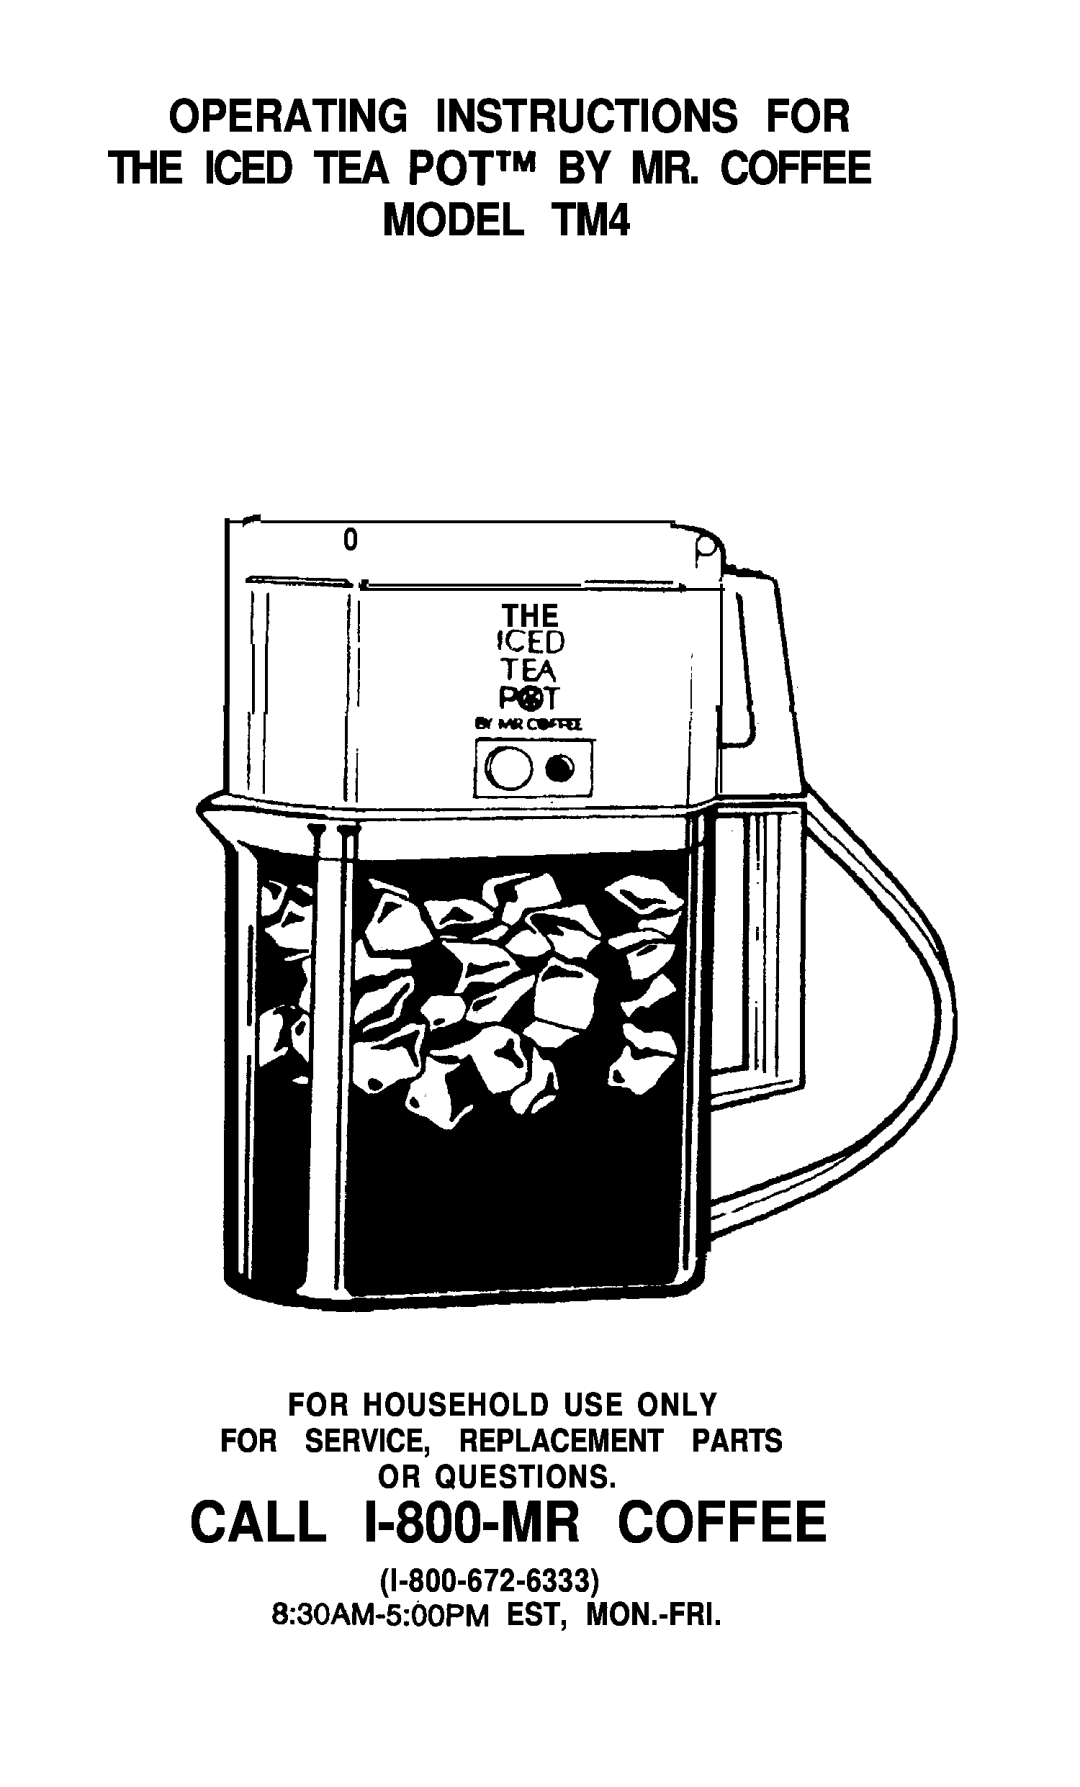 Mr. Coffee TM4 manual THE 7ICED Ii gi FOR HOUSEHOLD USE ONLY, For Service, Replacement Parts Or Questions 